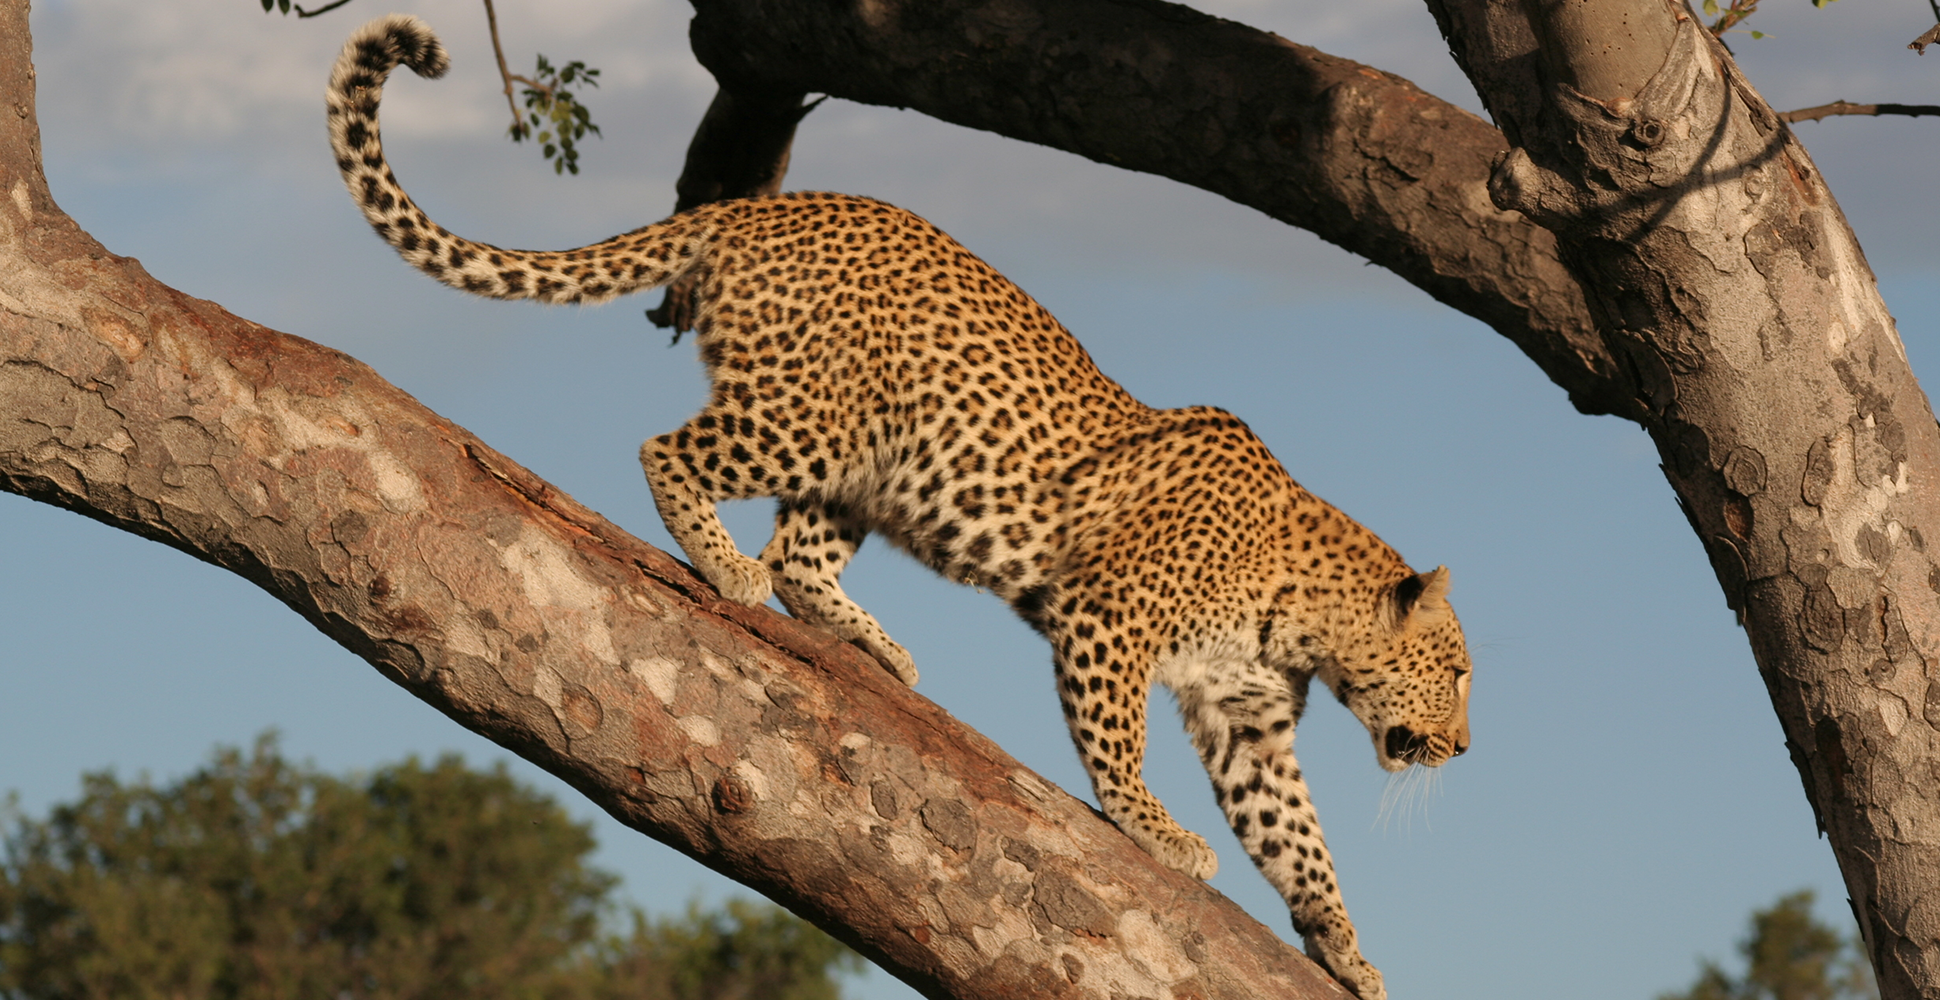 A spotted leopard makes his way down an acacia tree, Botswana